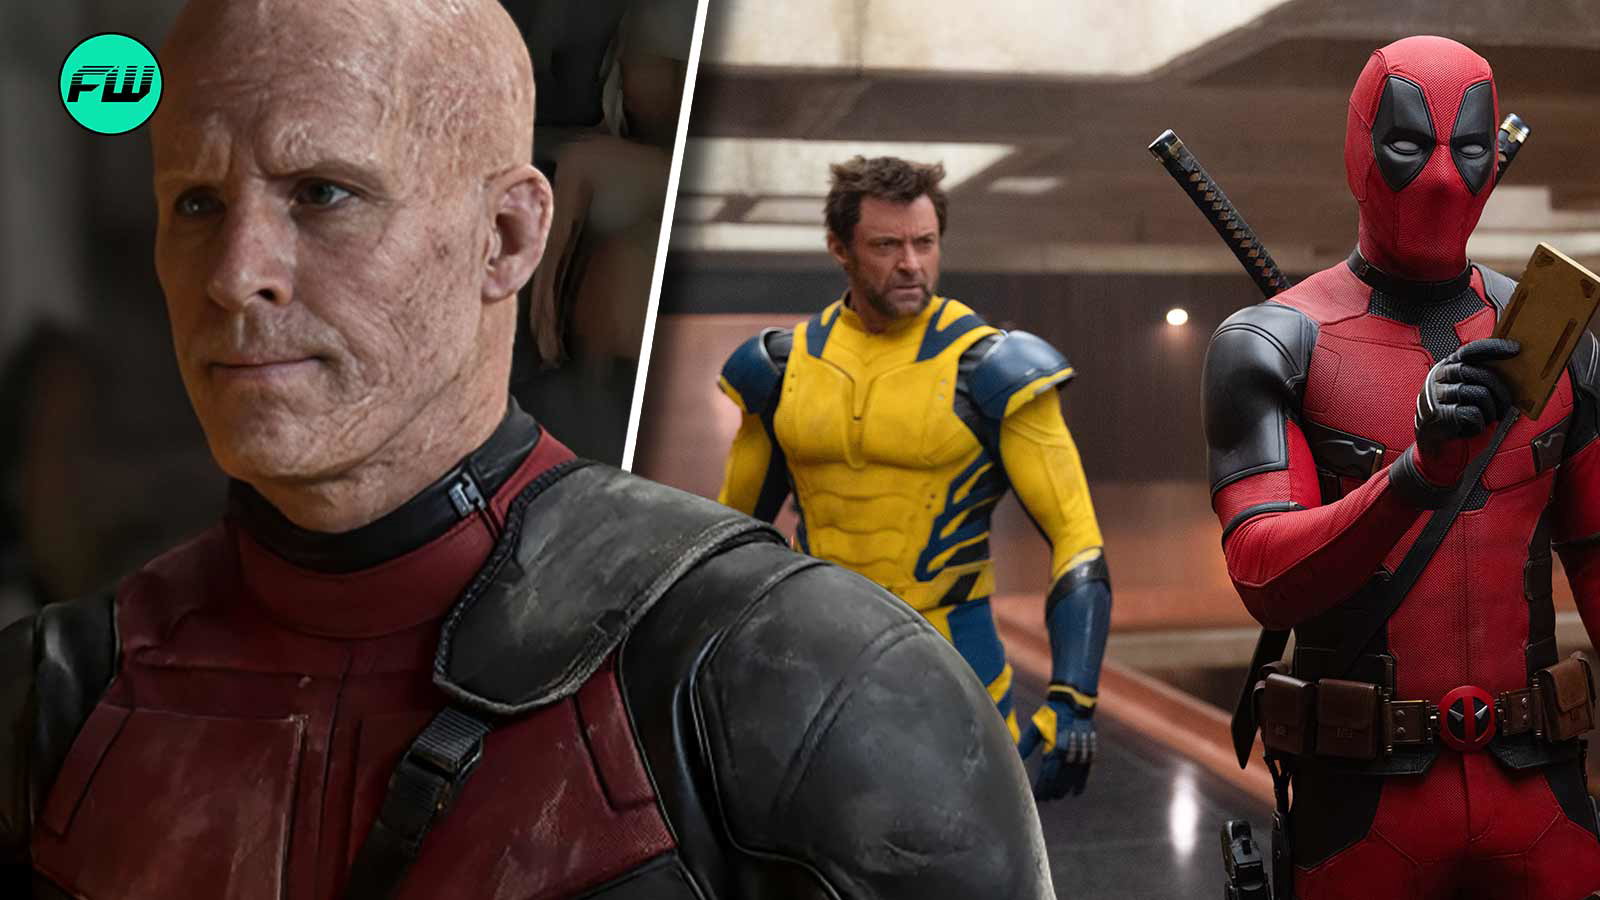 “I KNOW Ryan wouldn’t do me like that”: Amid All the Cameos of MCU Heroes, Ryan Reynolds’ Best Friend and Business Partner is Not Happy With the Deadpool Star